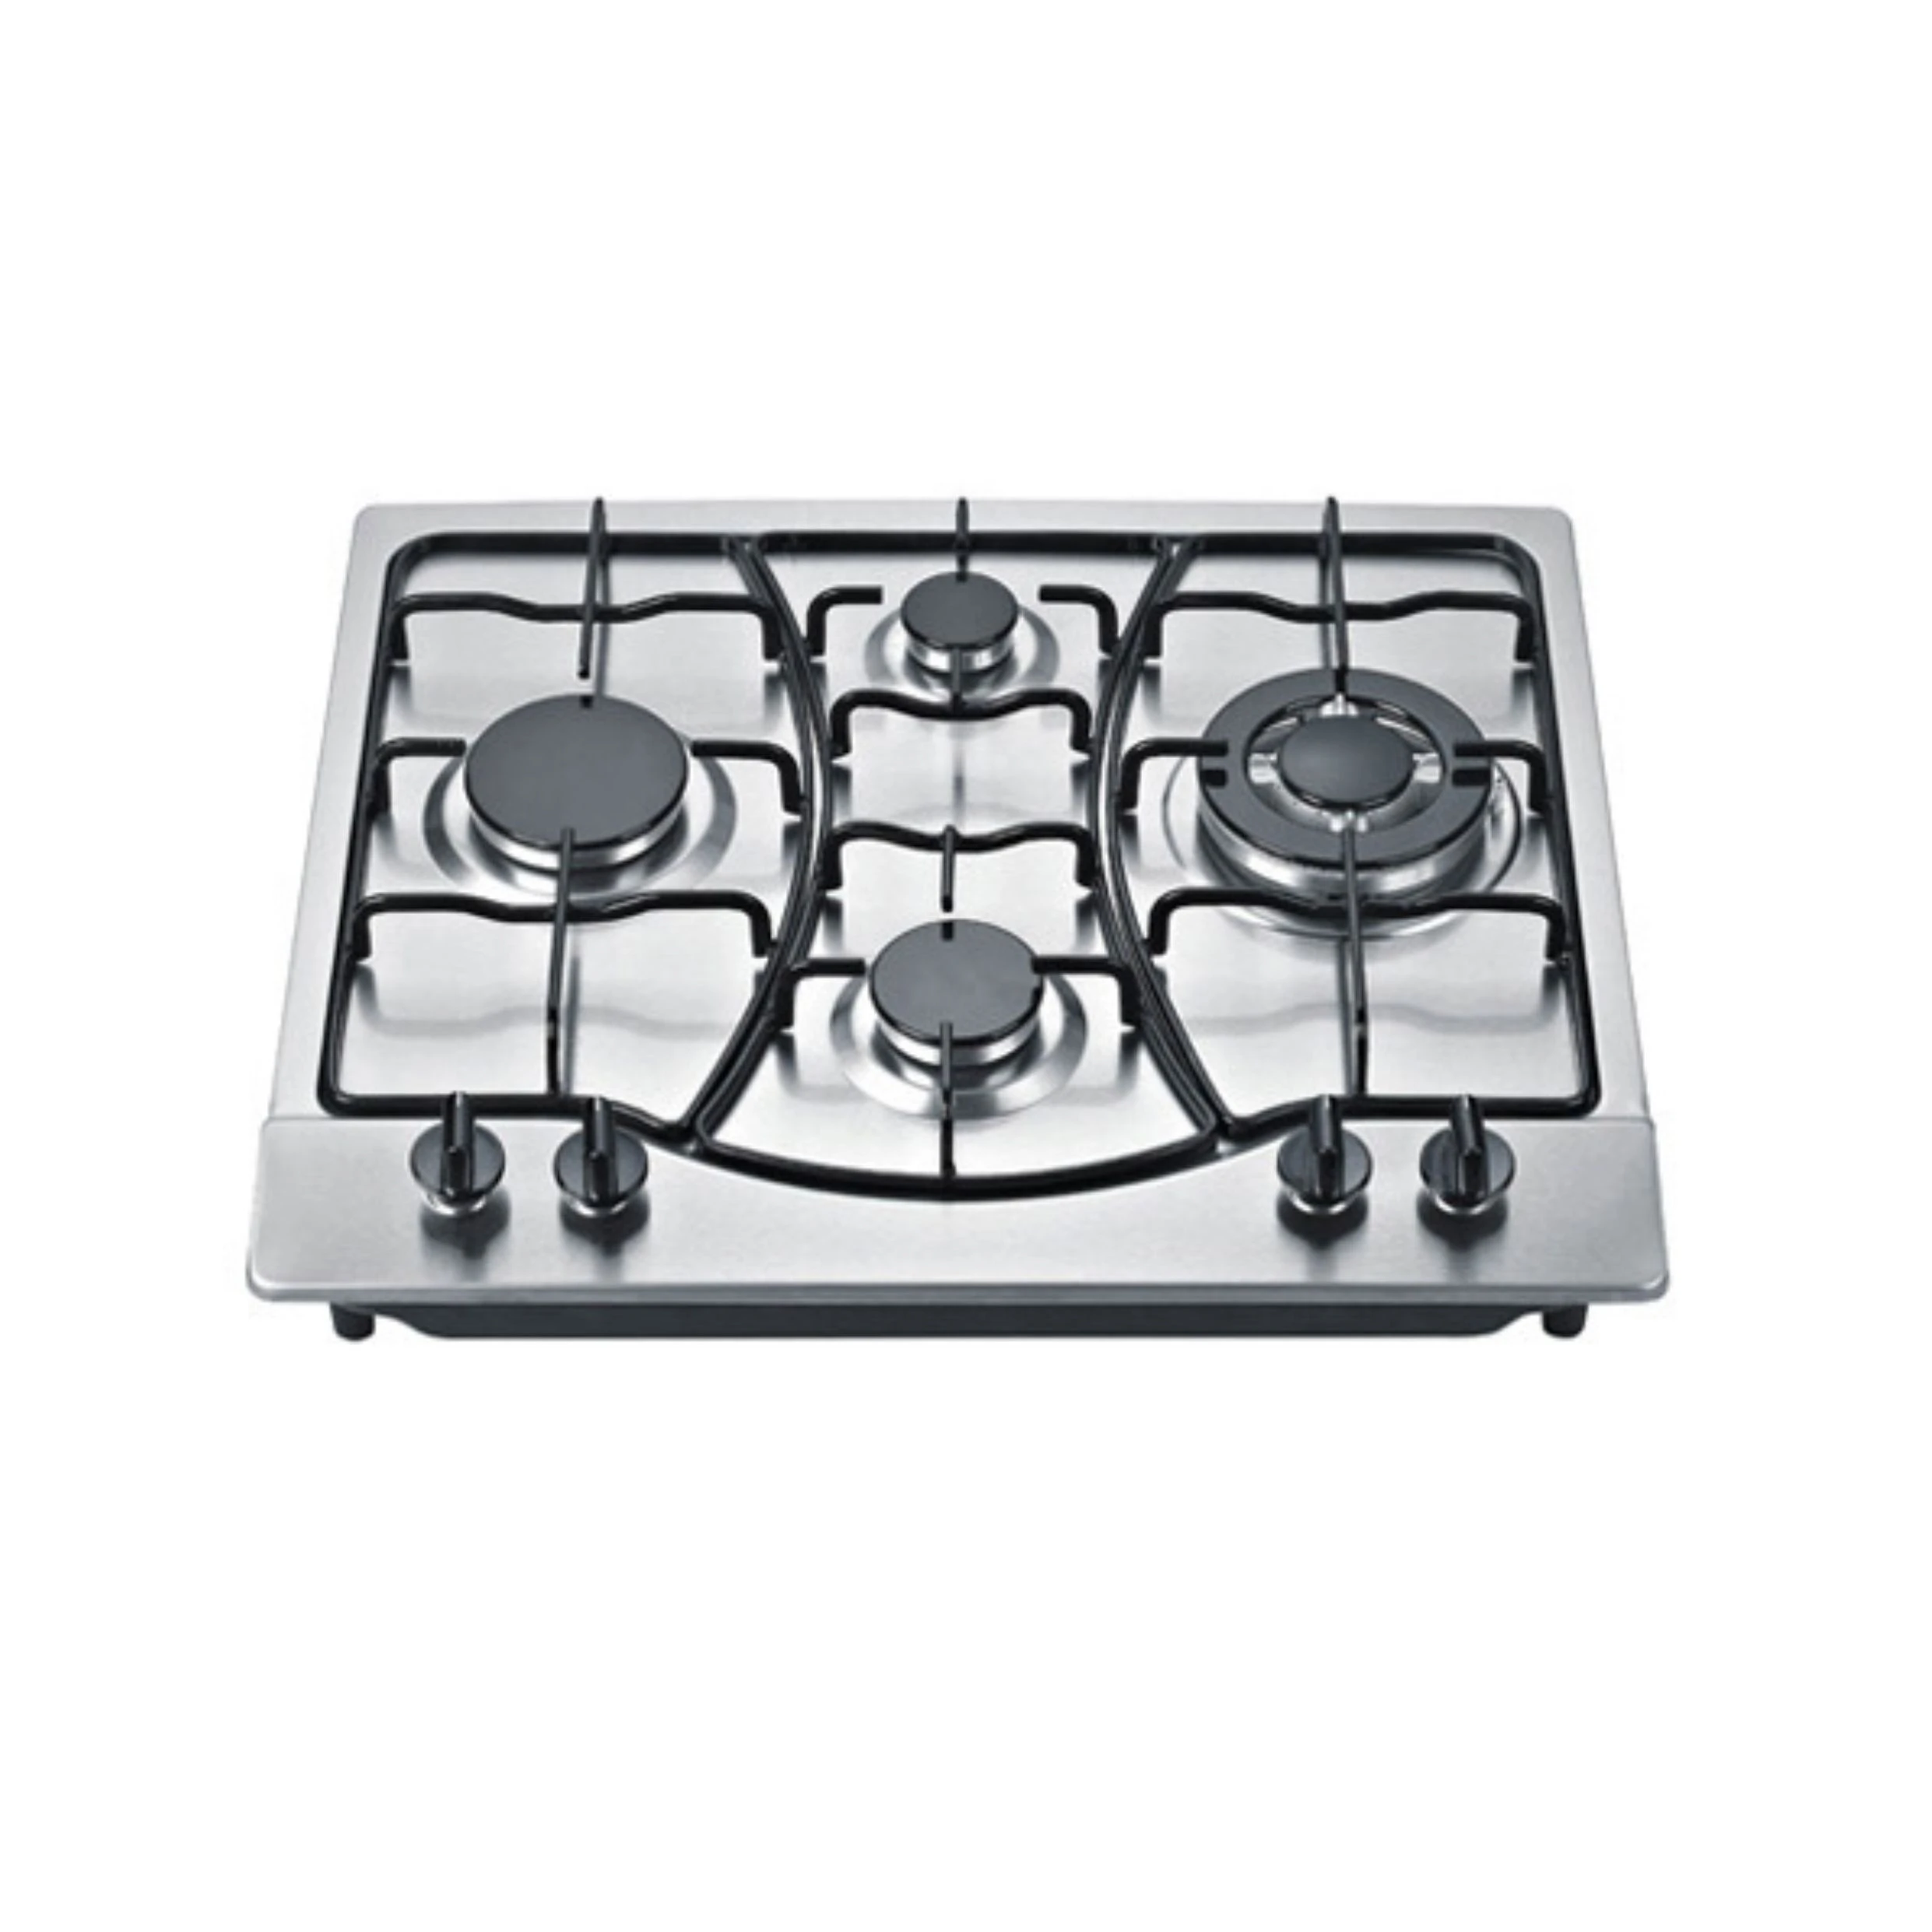 New Design  60cm Stainless Steel 4 Burner Gas Hob With Flame Safety Device Enamelled Pan Stand Right Side Knob Control